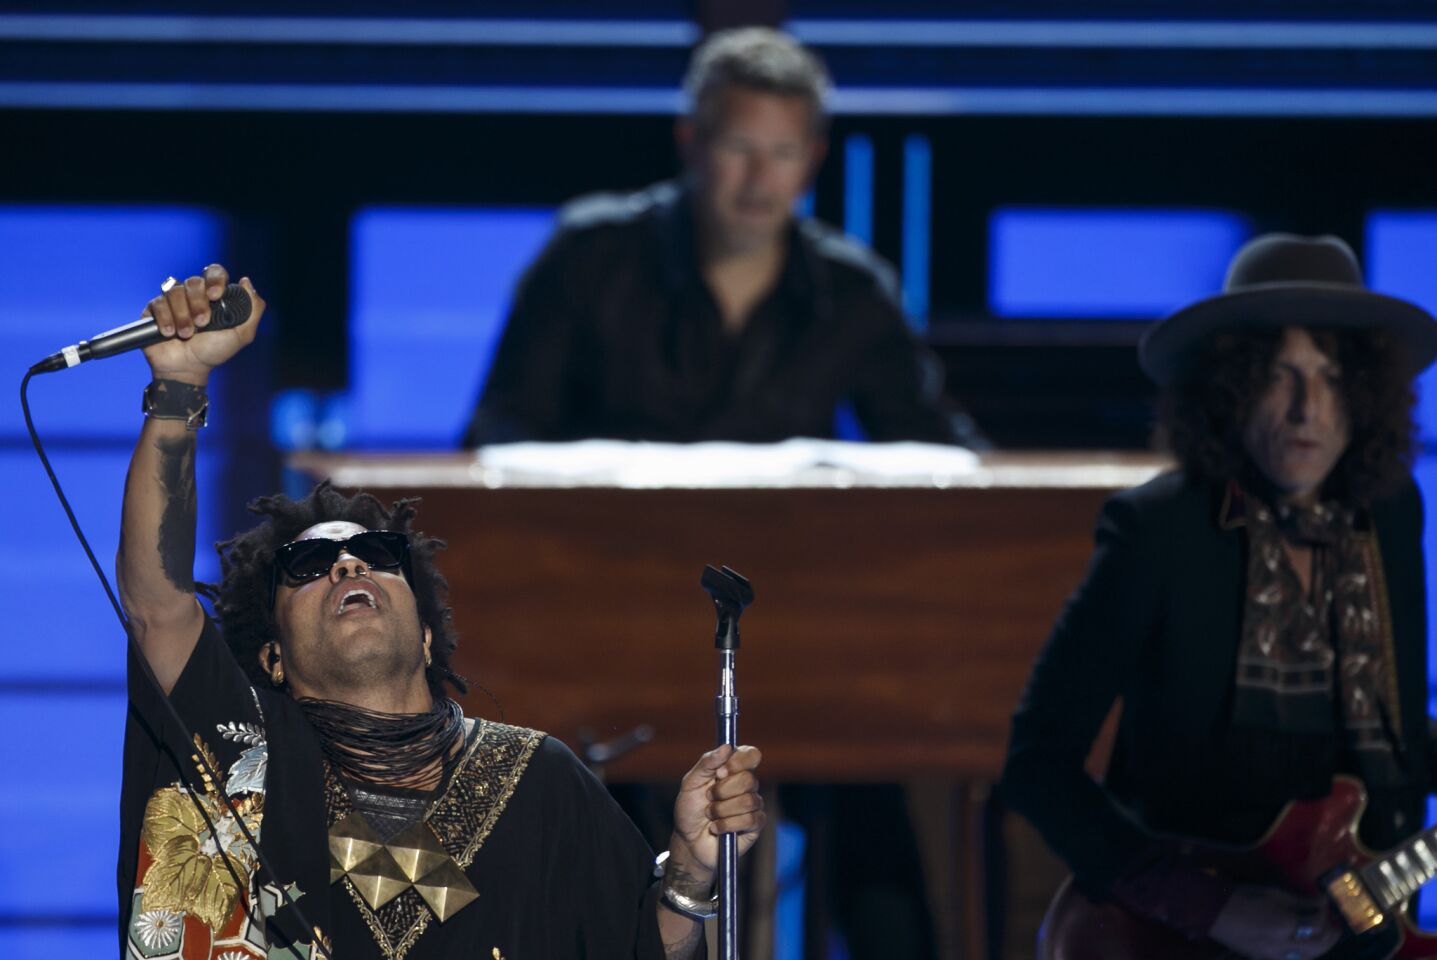 Lenny Kravitz performs at the 2016 Democratic National Convention in Philadelphia.